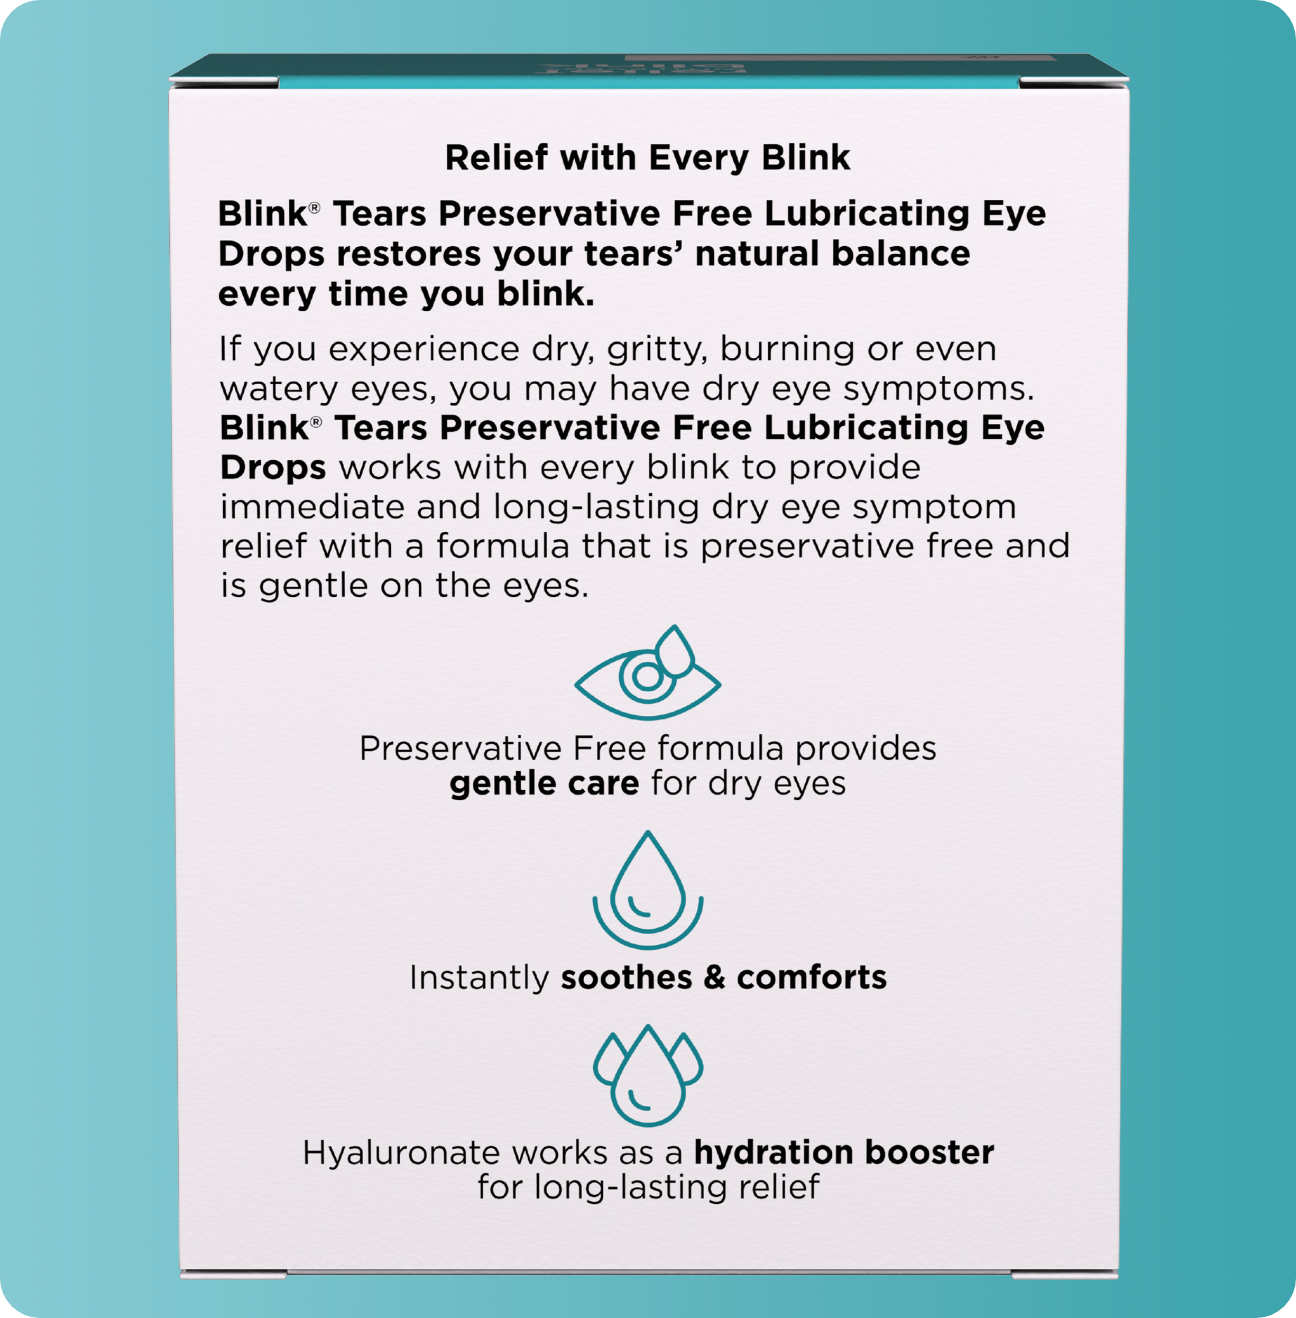 Blink Tears Preservative Free carton with product summary